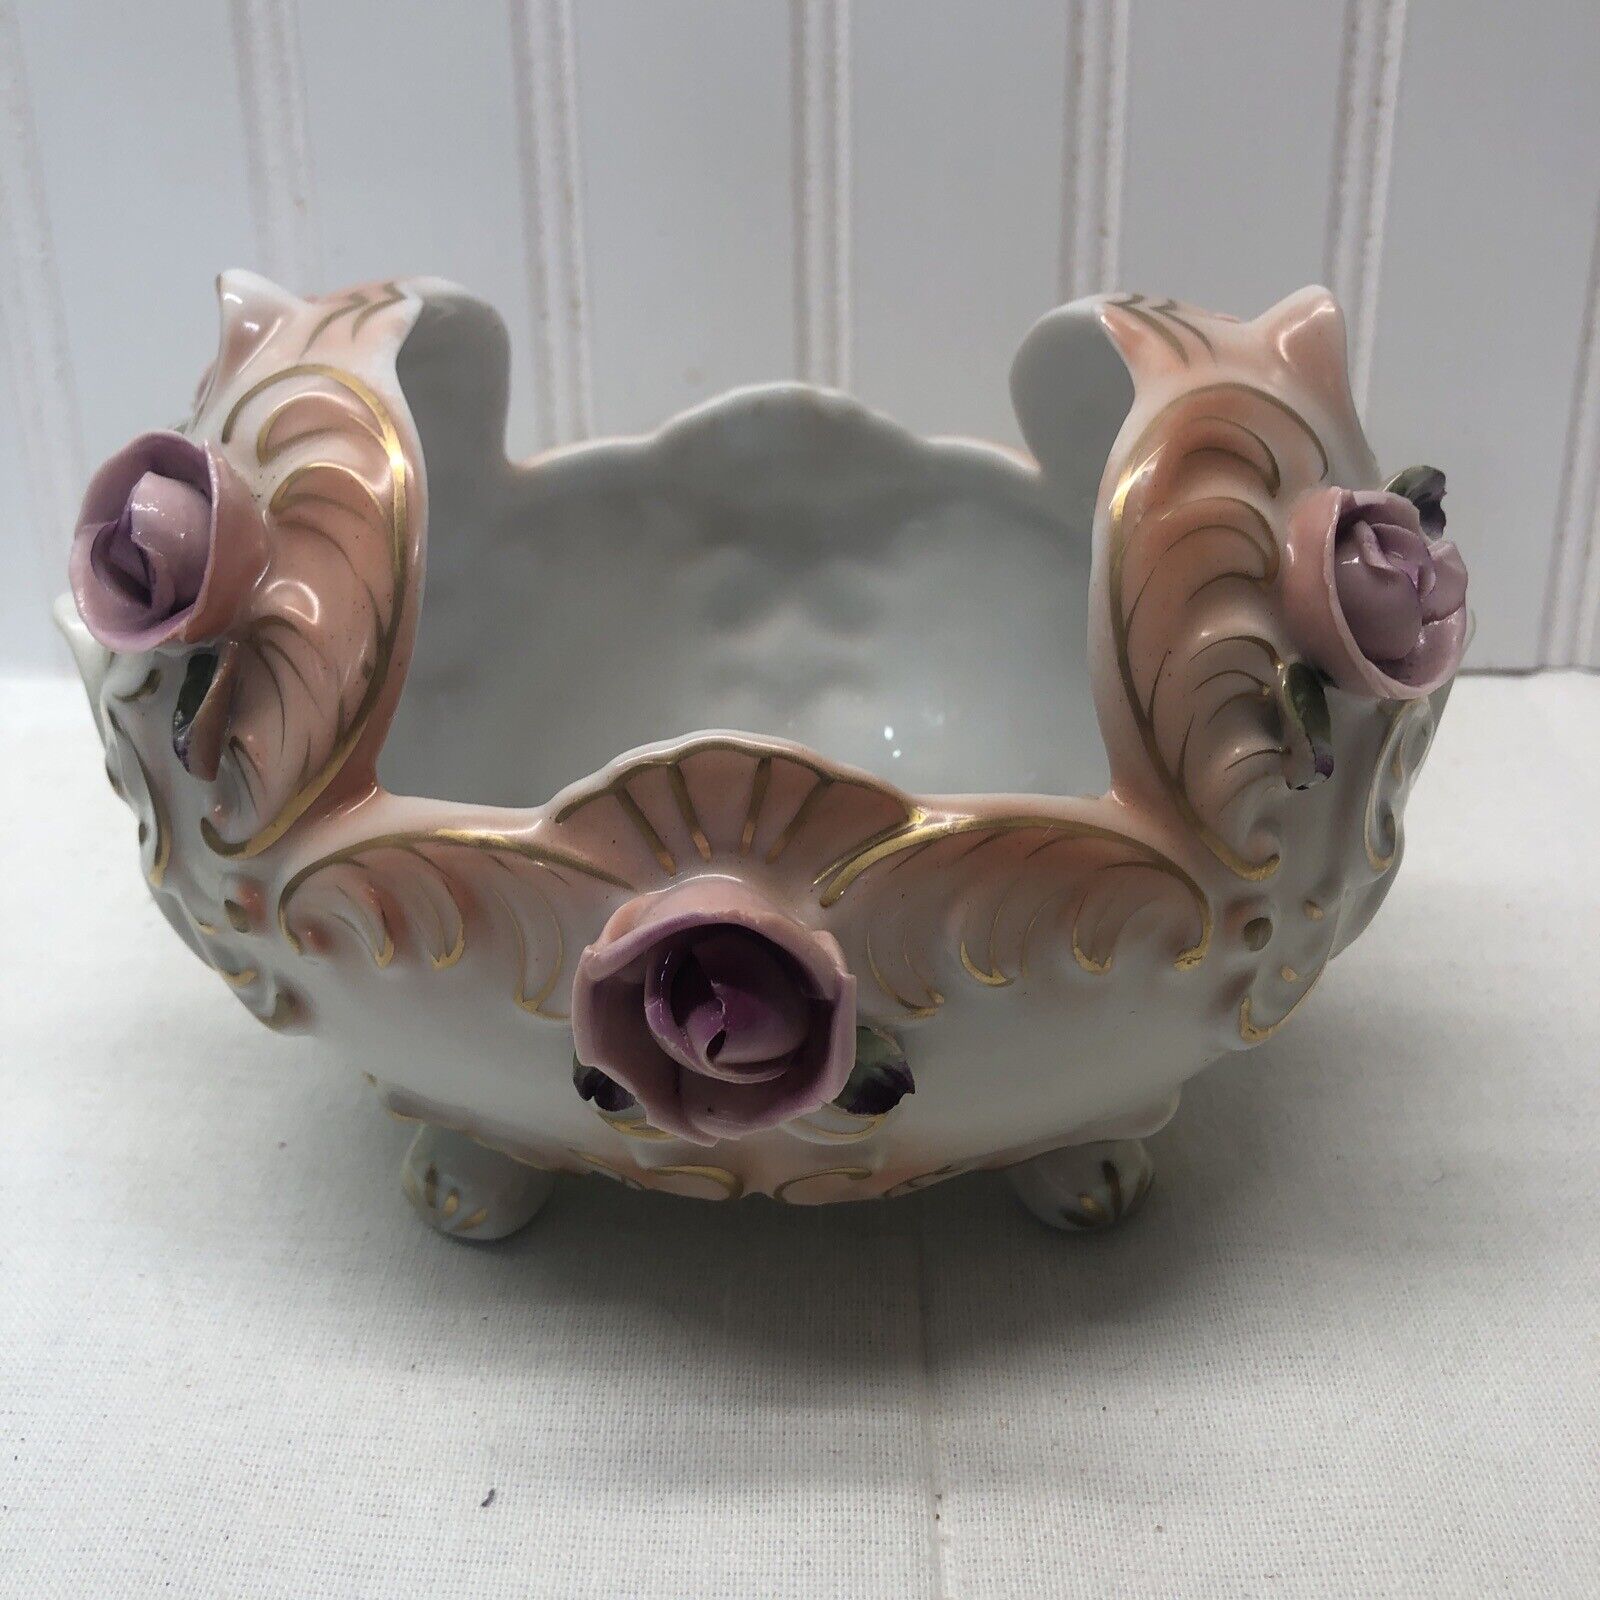 Vintage Ucagco Japan Hand Painted Pink Rose Vase Planter Container 7”x4.5”x5.5”